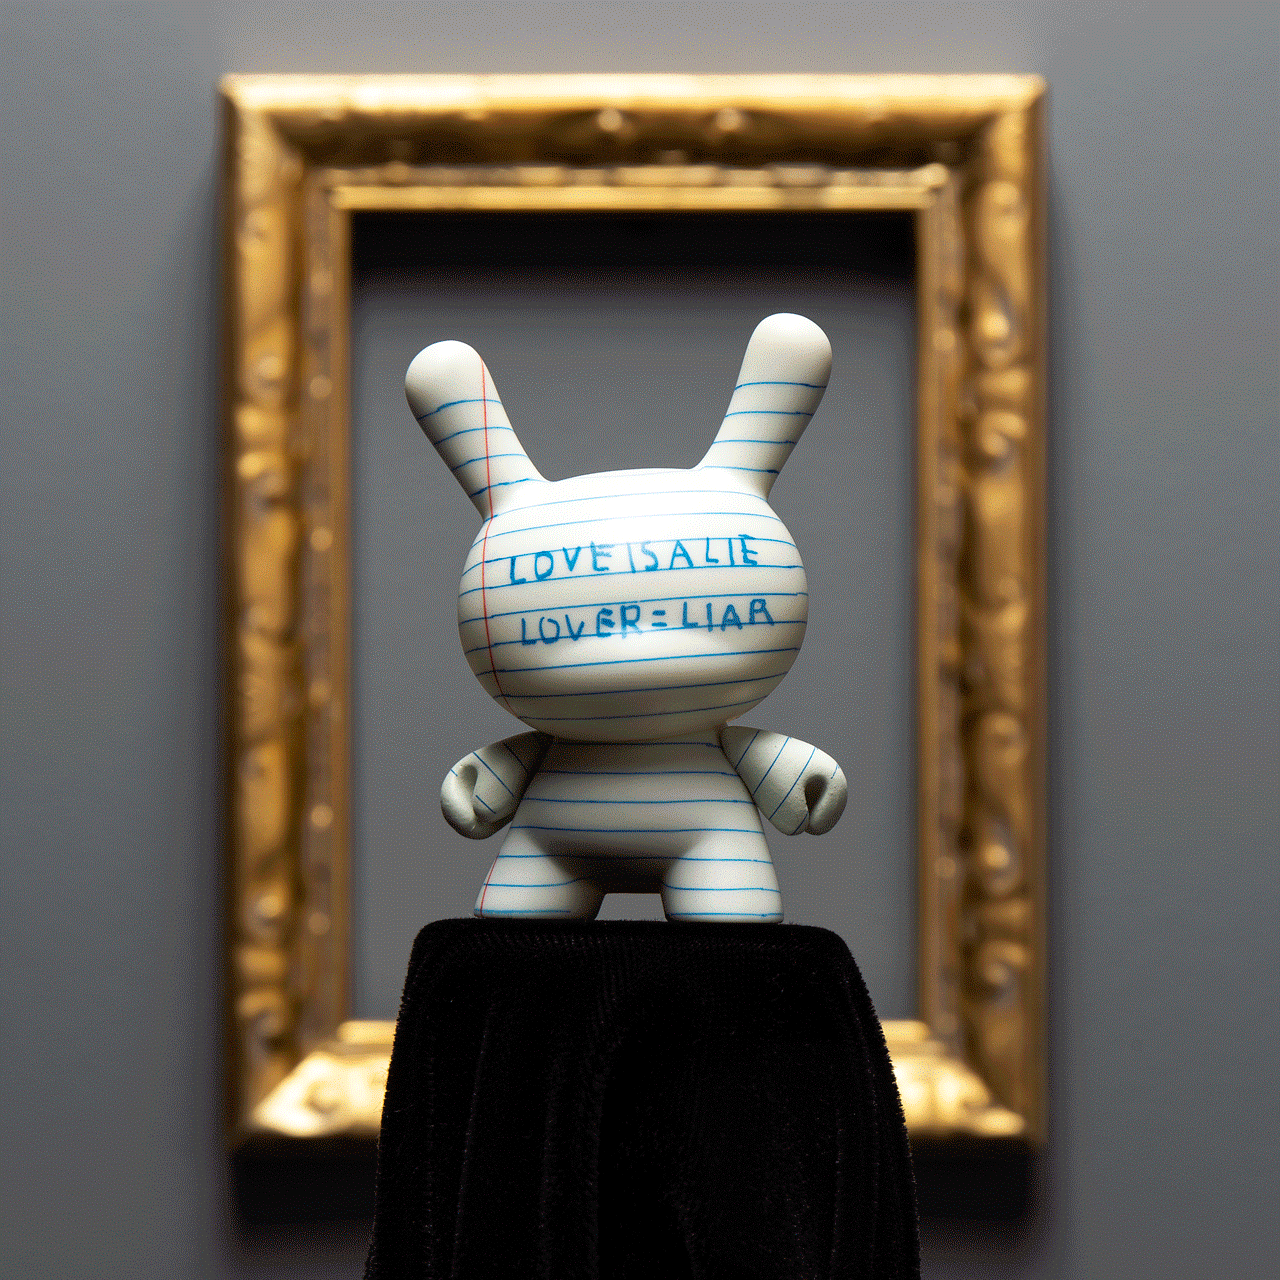 jean michel basquiat x kidrobot dunny art figure series launches dolphin paintings